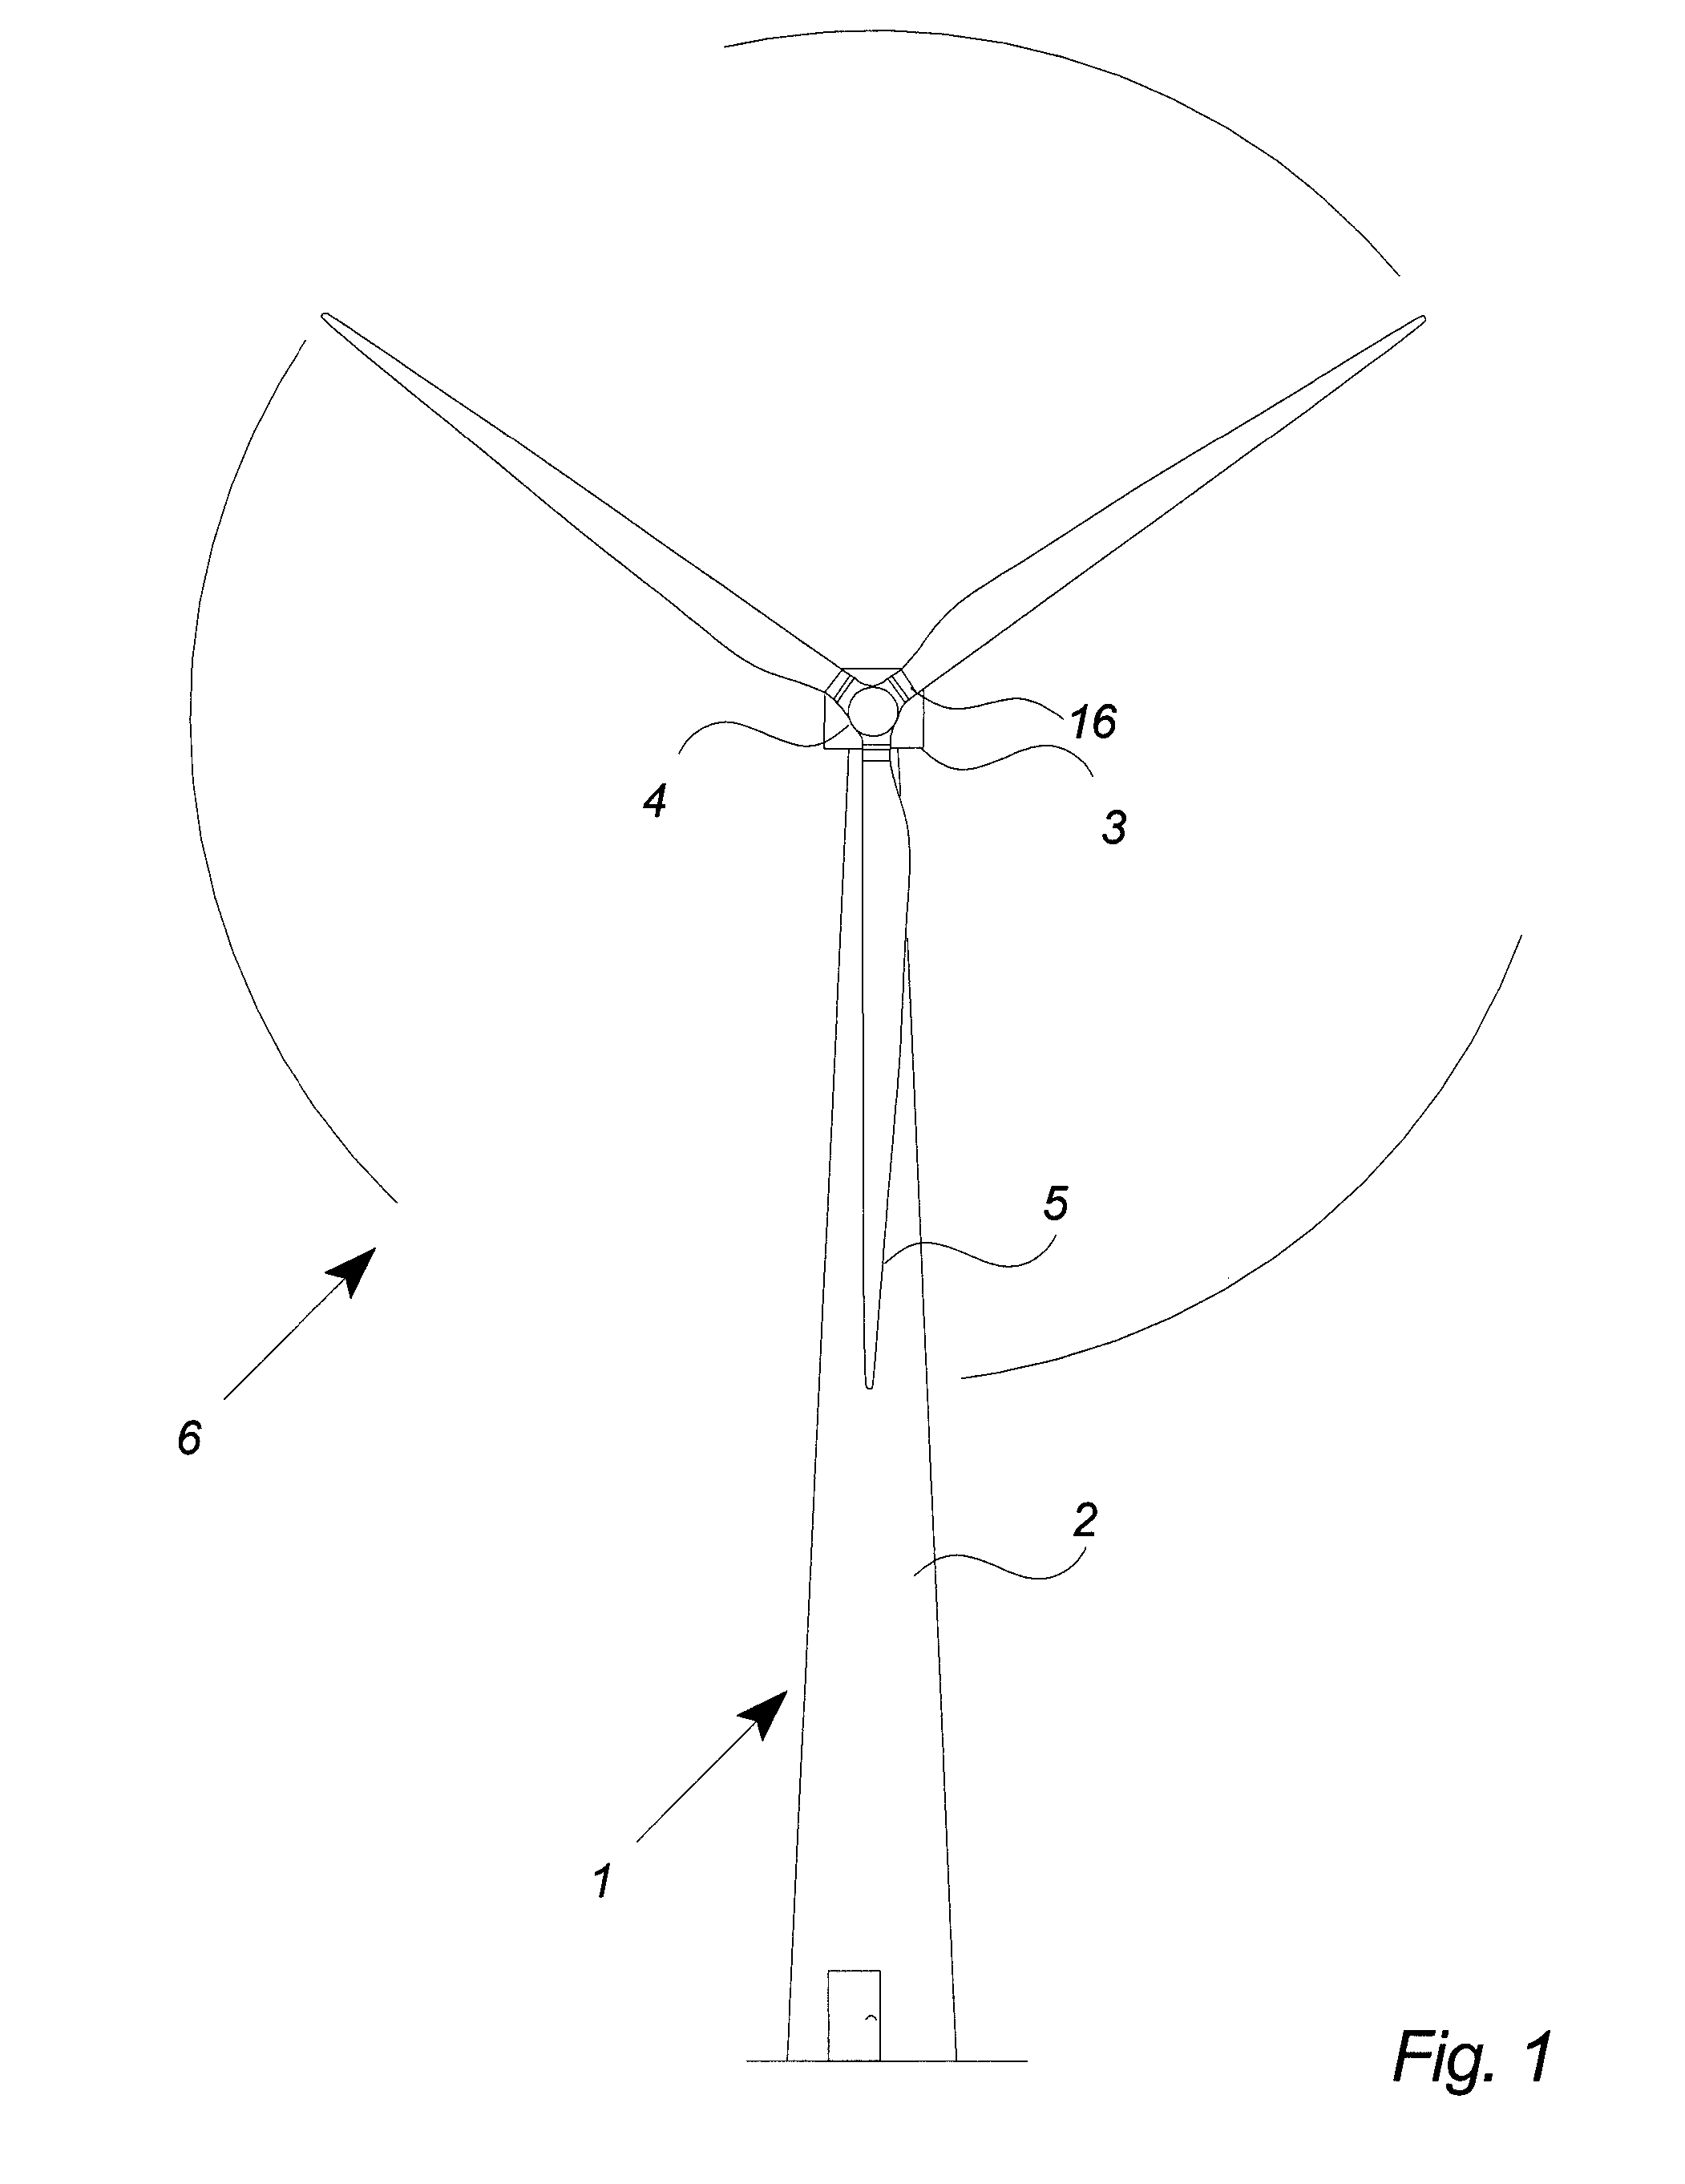 Method And Control System For Reducing The Fatigue Loads In The Components Of A Wind Turbine Subjected to Asymmetrical Loading Of The Rotor Plane